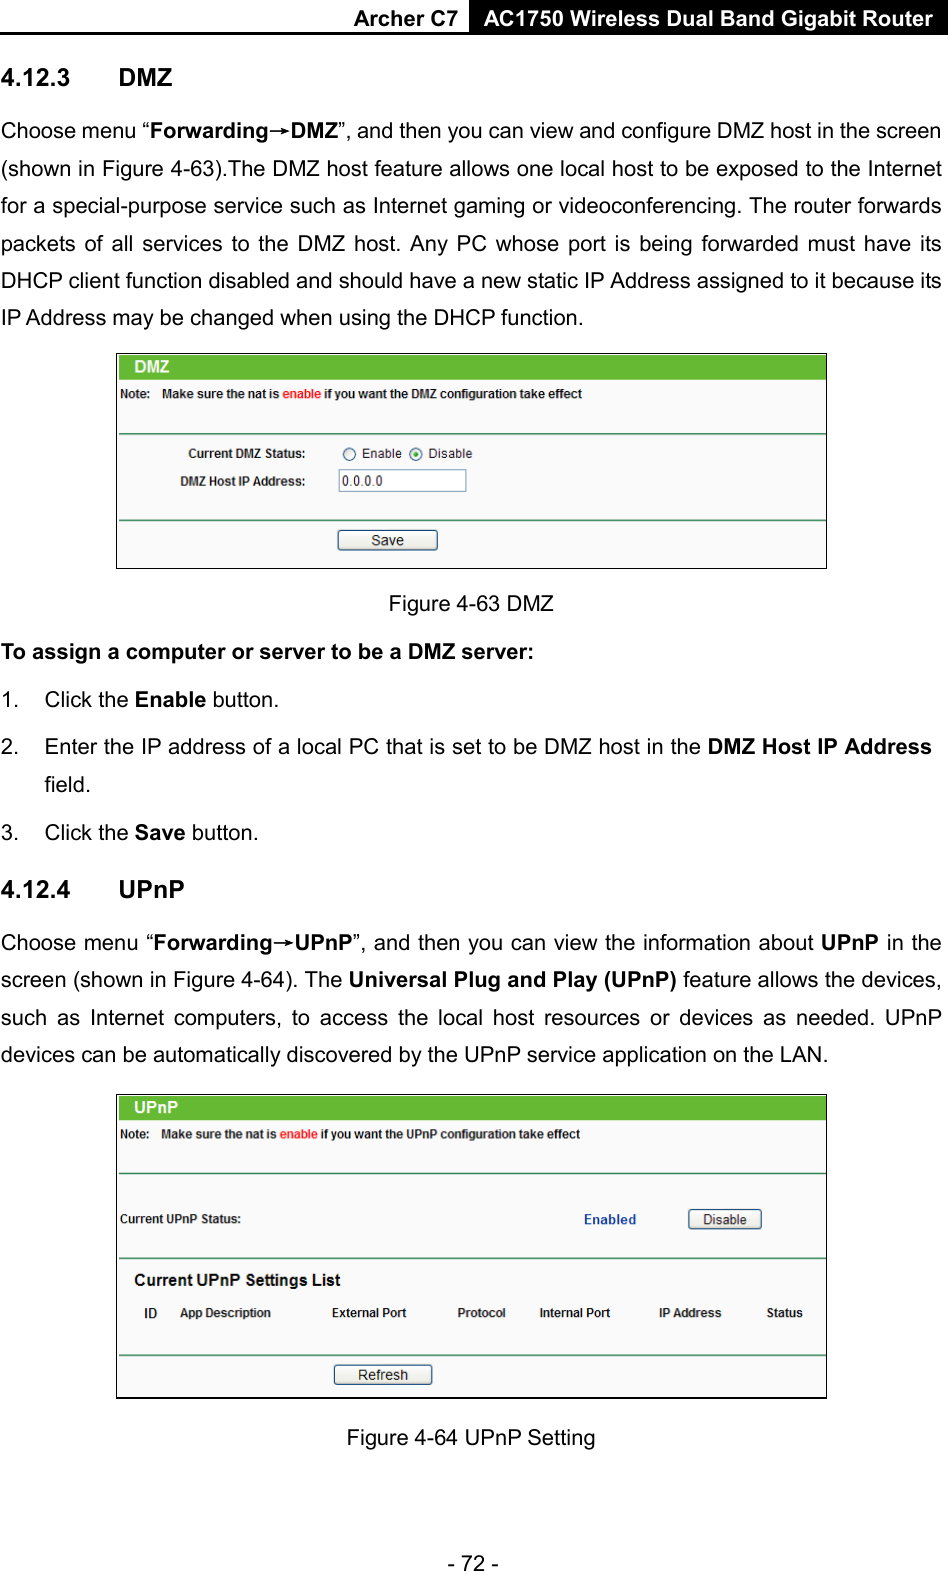 Archer C7 AC1750 Wireless Dual Band Gigabit Router  4.12.3 DMZ Choose menu “Forwarding→DMZ”, and then you can view and configure DMZ host in the screen (shown in Figure 4-63).The DMZ host feature allows one local host to be exposed to the Internet for a special-purpose service such as Internet gaming or videoconferencing. The router forwards packets of all services to the DMZ host. Any PC whose port is being forwarded must have its DHCP client function disabled and should have a new static IP Address assigned to it because its IP Address may be changed when using the DHCP function.  Figure 4-63 DMZ To assign a computer or server to be a DMZ server:   1. Click the Enable button.   2. Enter the IP address of a local PC that is set to be DMZ host in the DMZ Host IP Address field.   3. Click the Save button.   4.12.4 UPnP Choose menu “Forwarding→UPnP”, and then you can view the information about UPnP in the screen (shown in Figure 4-64). The Universal Plug and Play (UPnP) feature allows the devices, such as Internet computers, to access the local host resources or devices as needed. UPnP devices can be automatically discovered by the UPnP service application on the LAN.  Figure 4-64 UPnP Setting - 72 - 